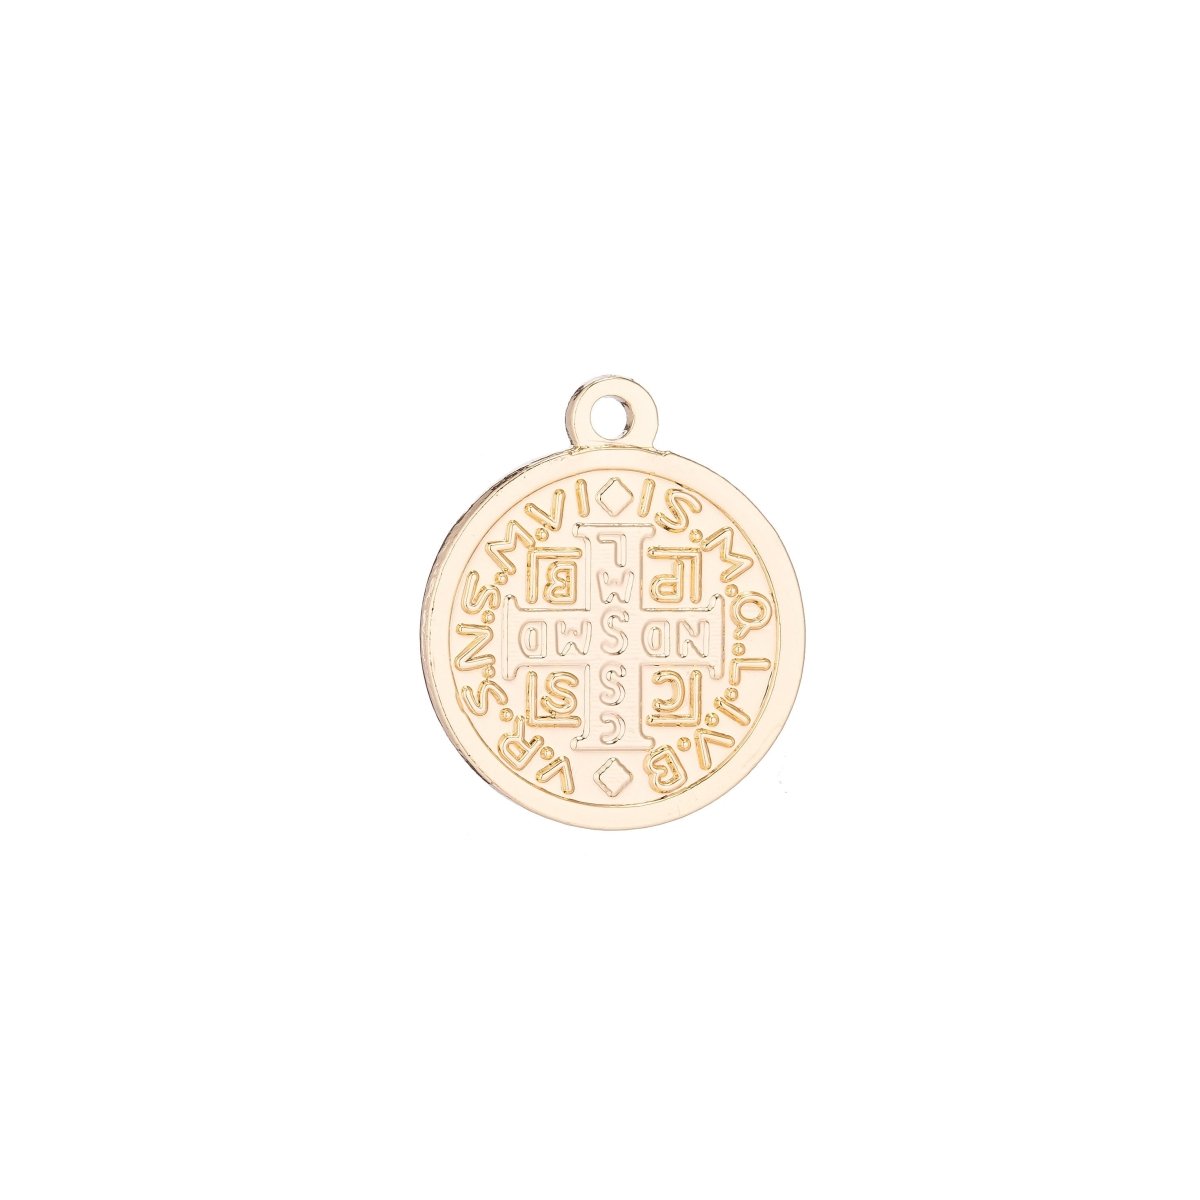 Virtute Tua Fiat Pax in (May there be peace in your strength) Pendant Charm Gold Filled C-007 C-298 - DLUXCA